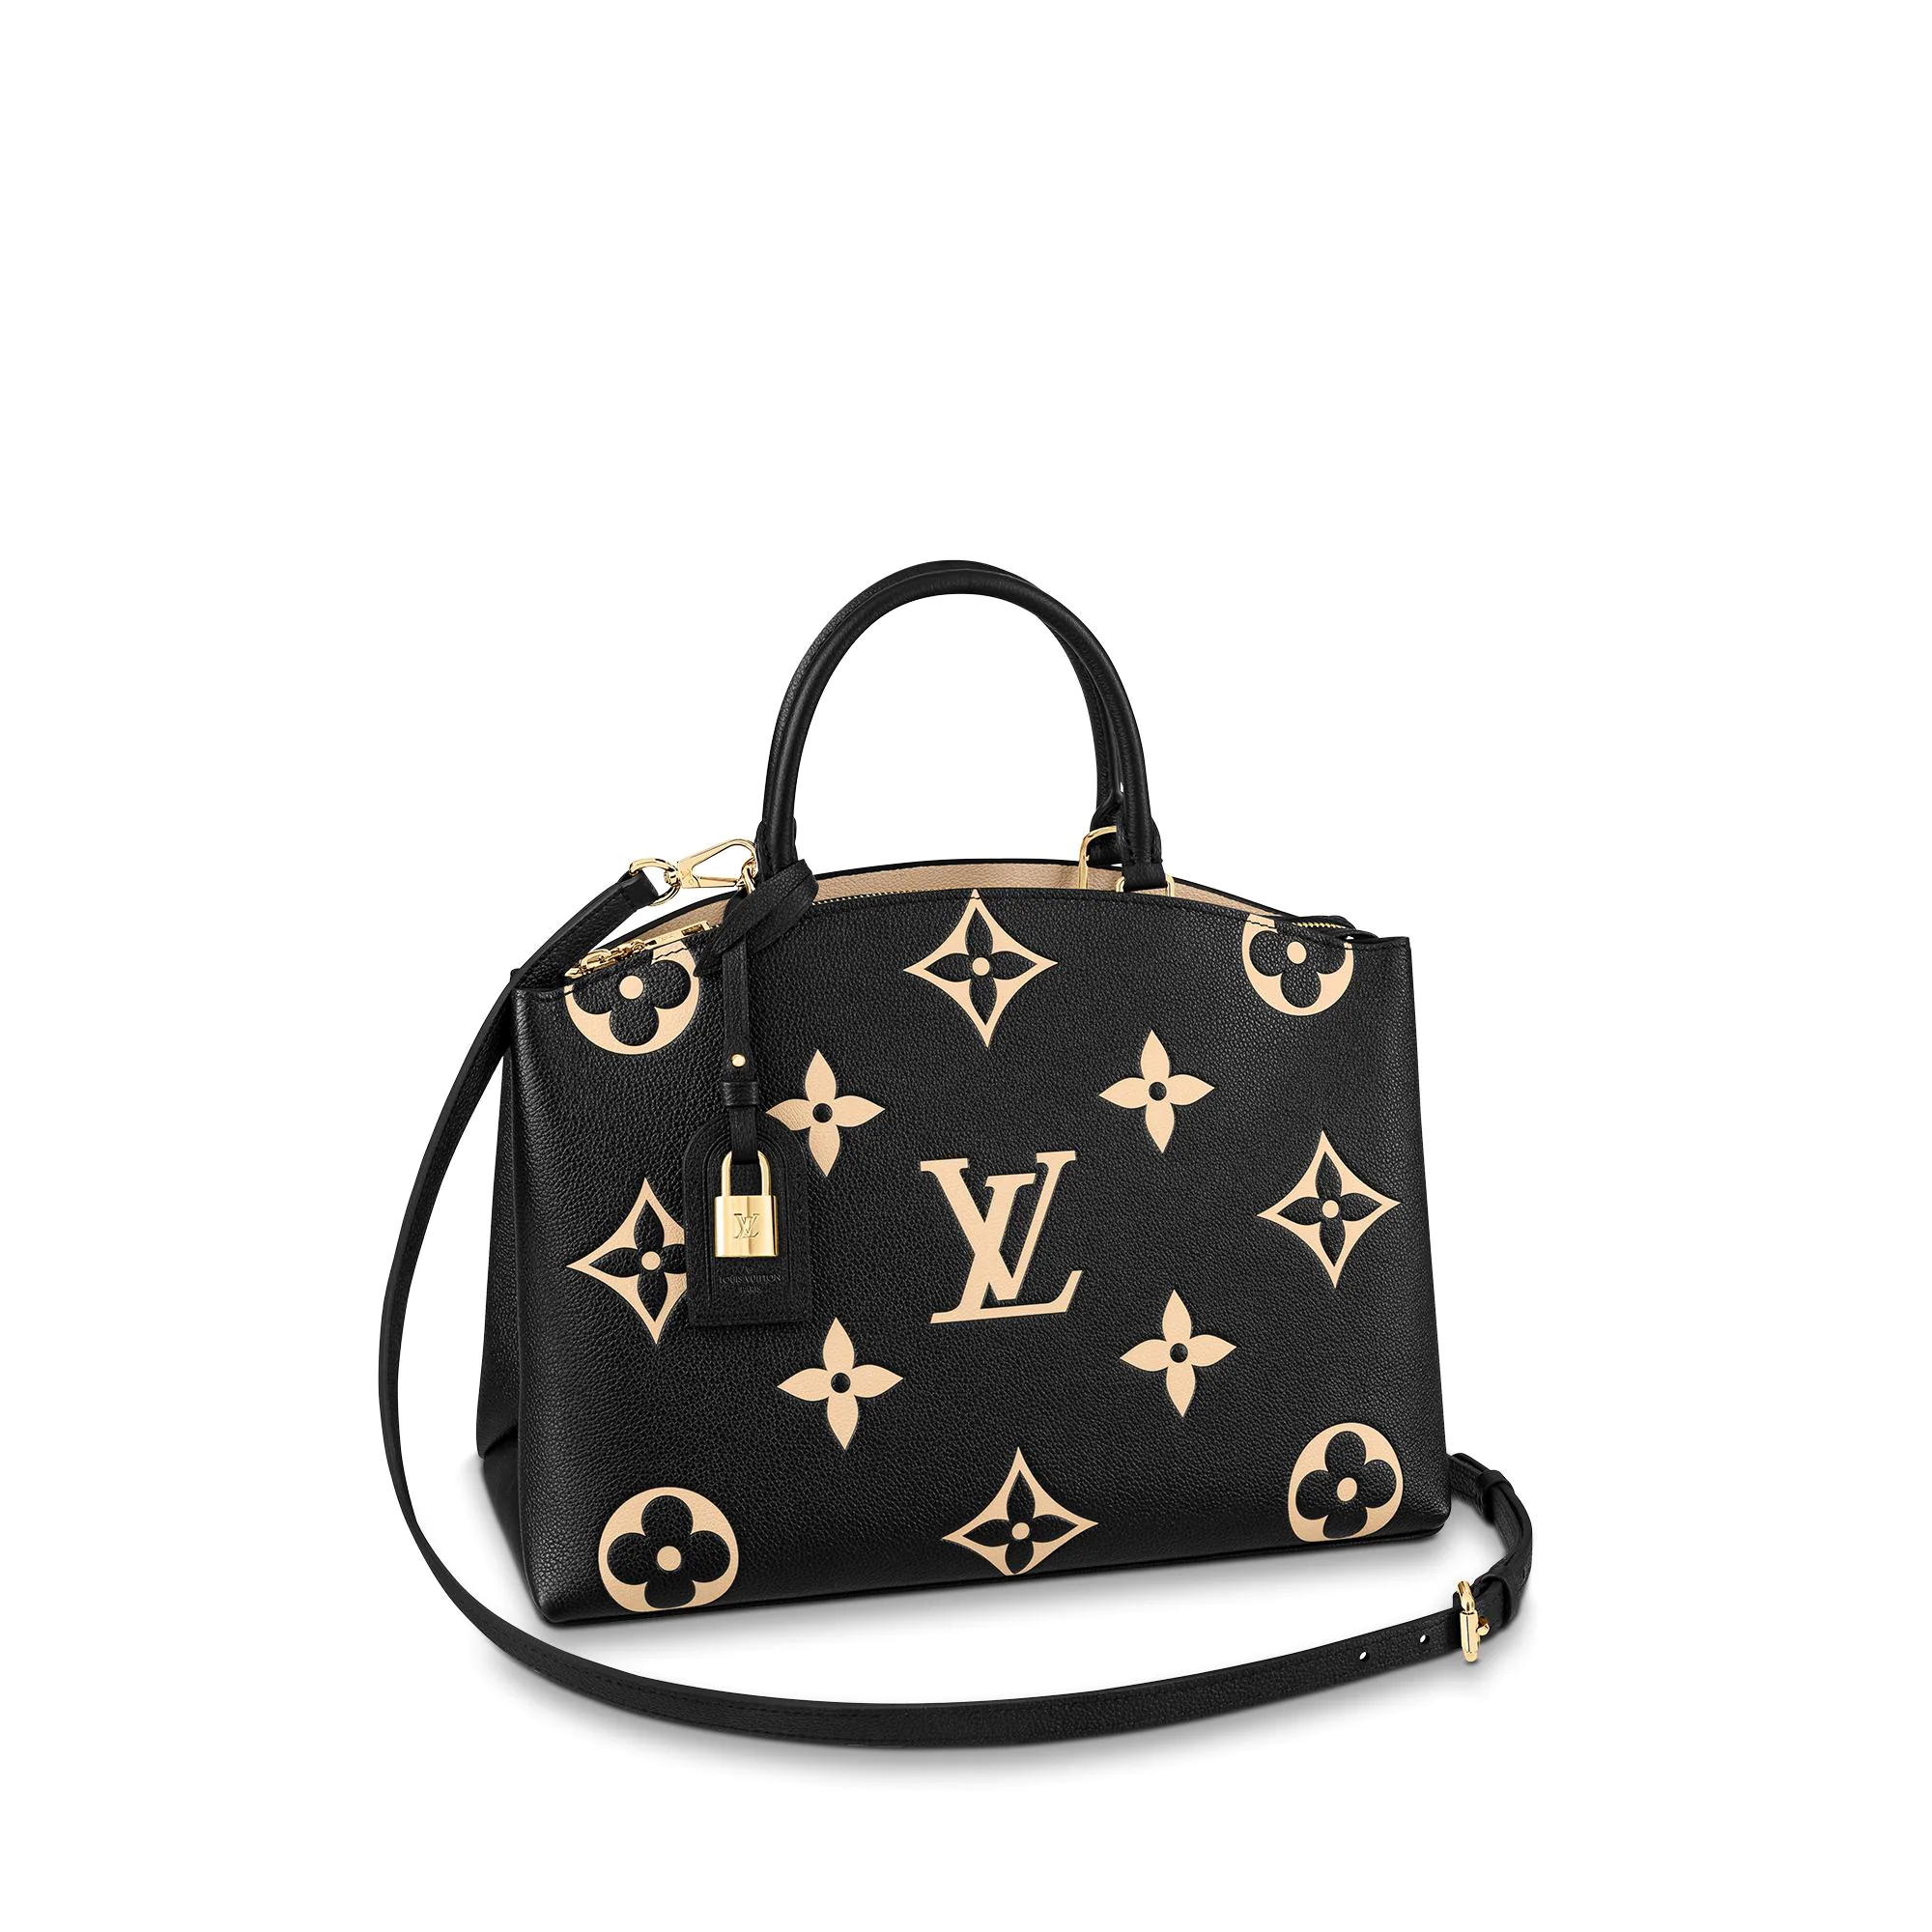 Looking for the Perfect Louis Vuitton Bag? Look No Further!